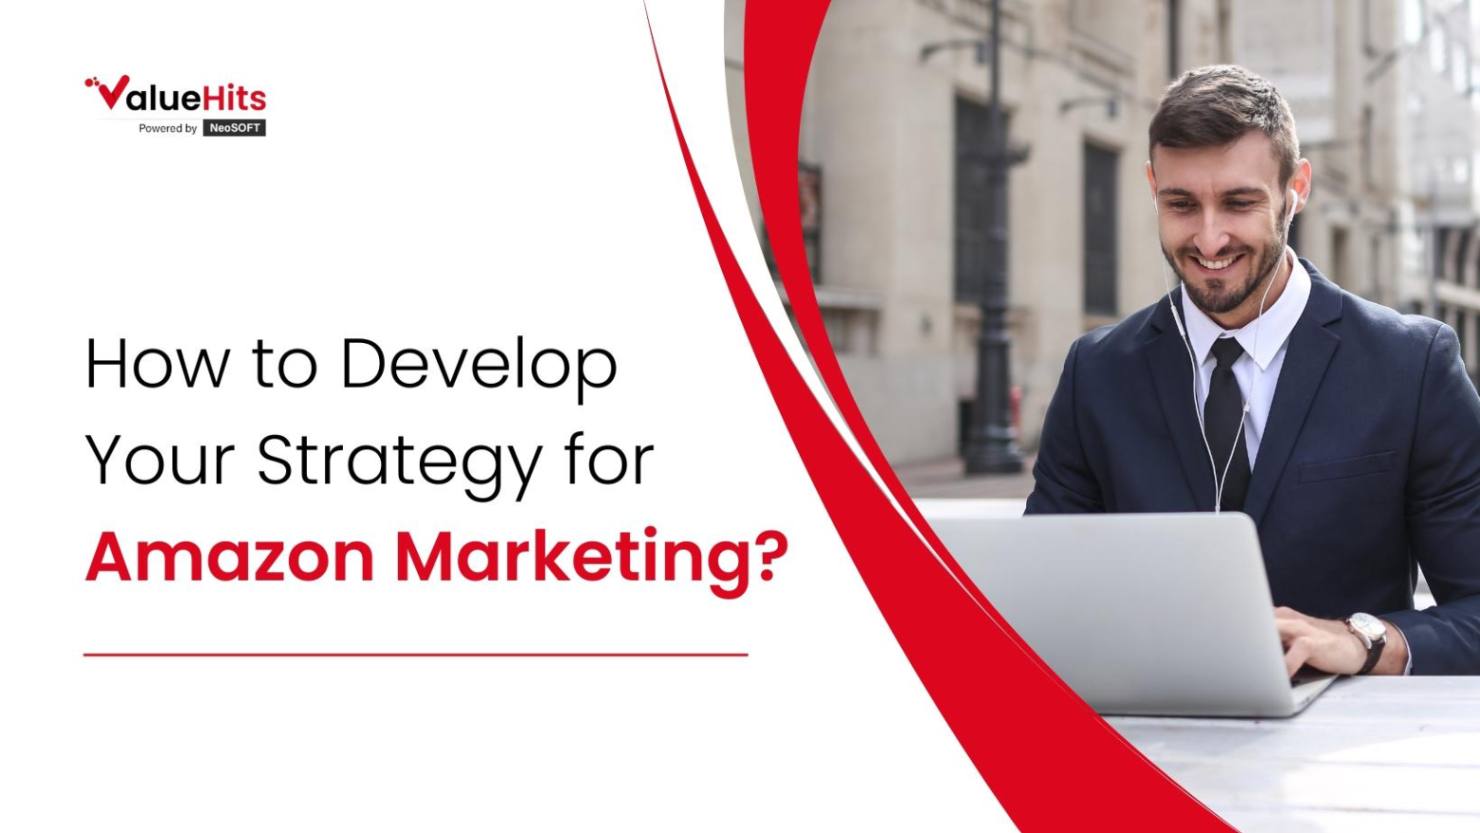 How to Develop Your Strategy for Amazon Marketing?